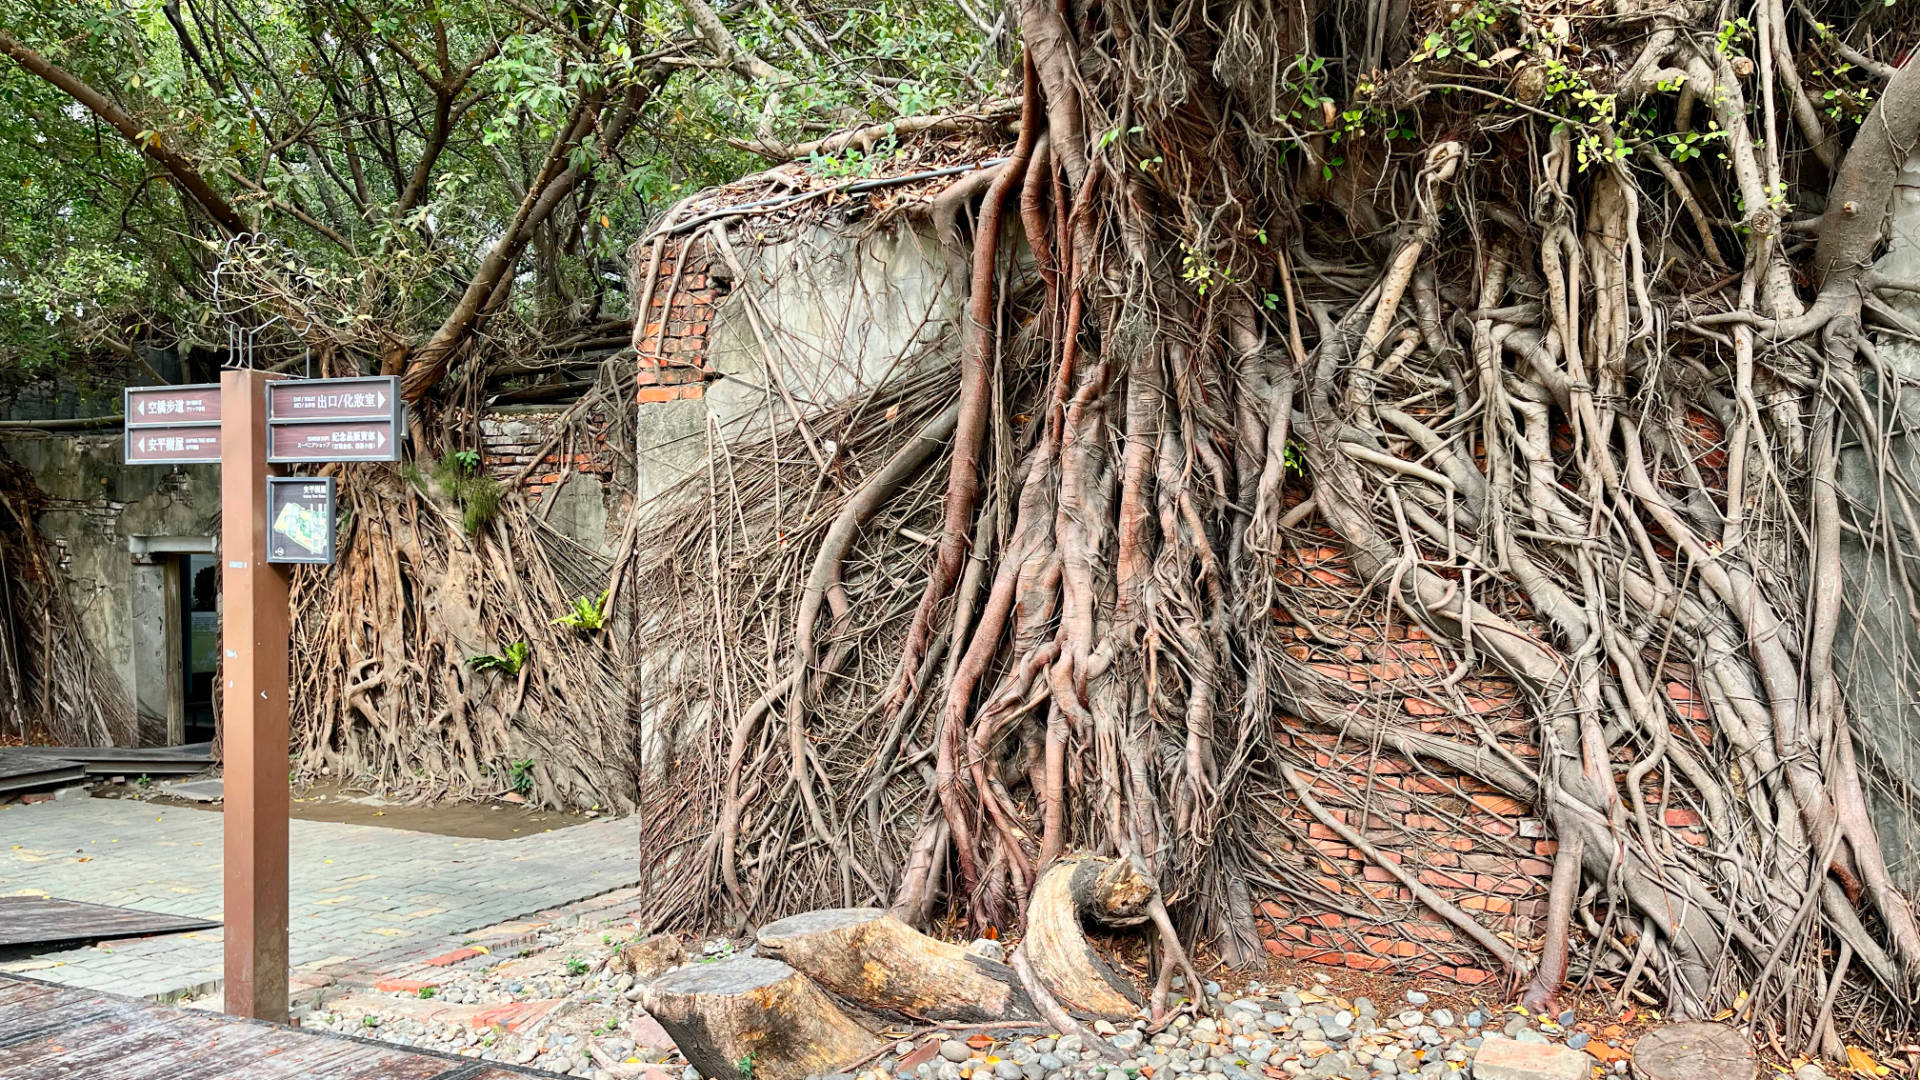 Exterior wall of the Anping Tree House, with banyan trees smothering the structure.